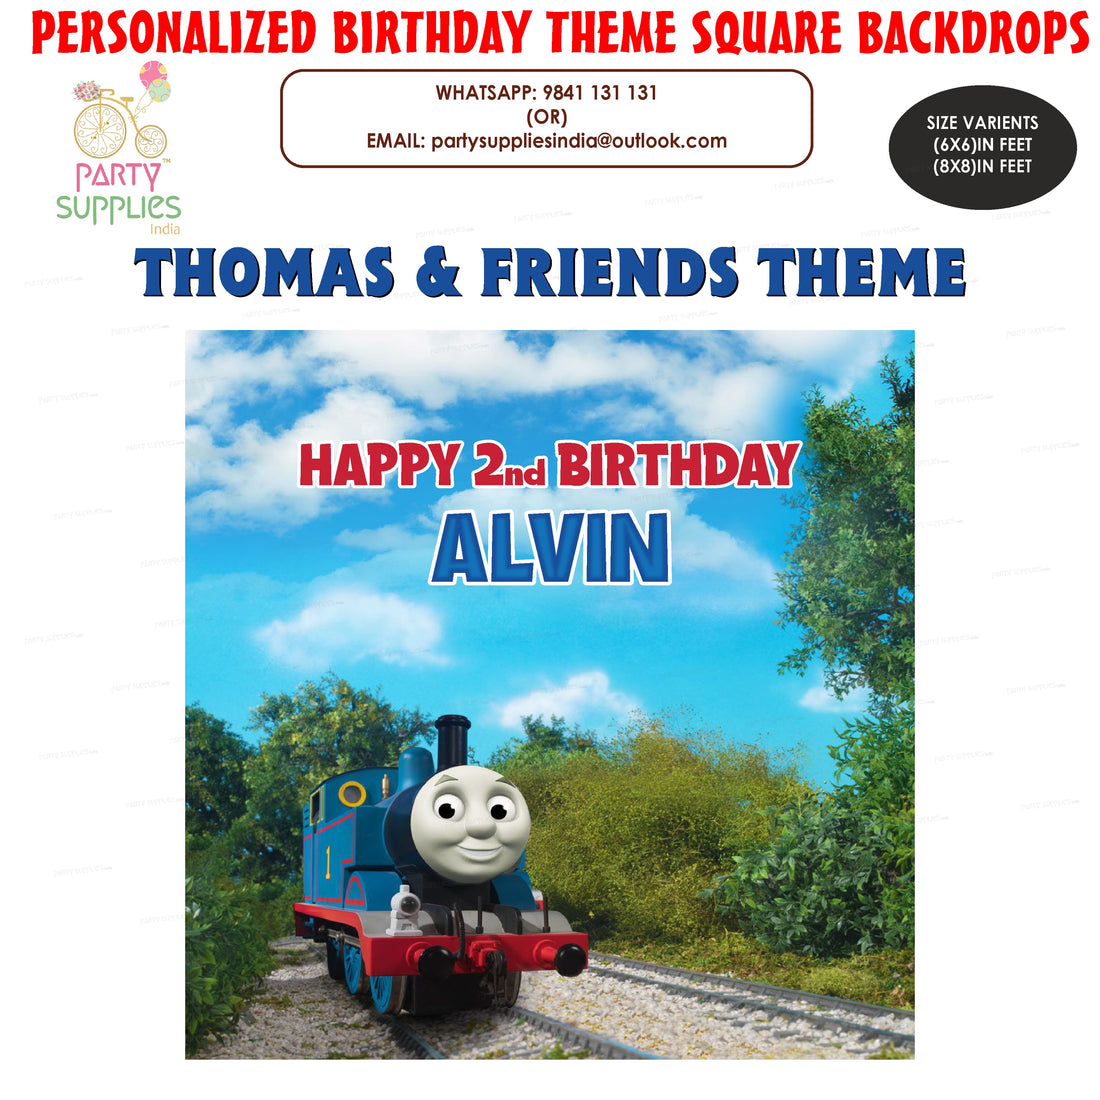 PSI Thomas and Friends Theme Square Backdrop